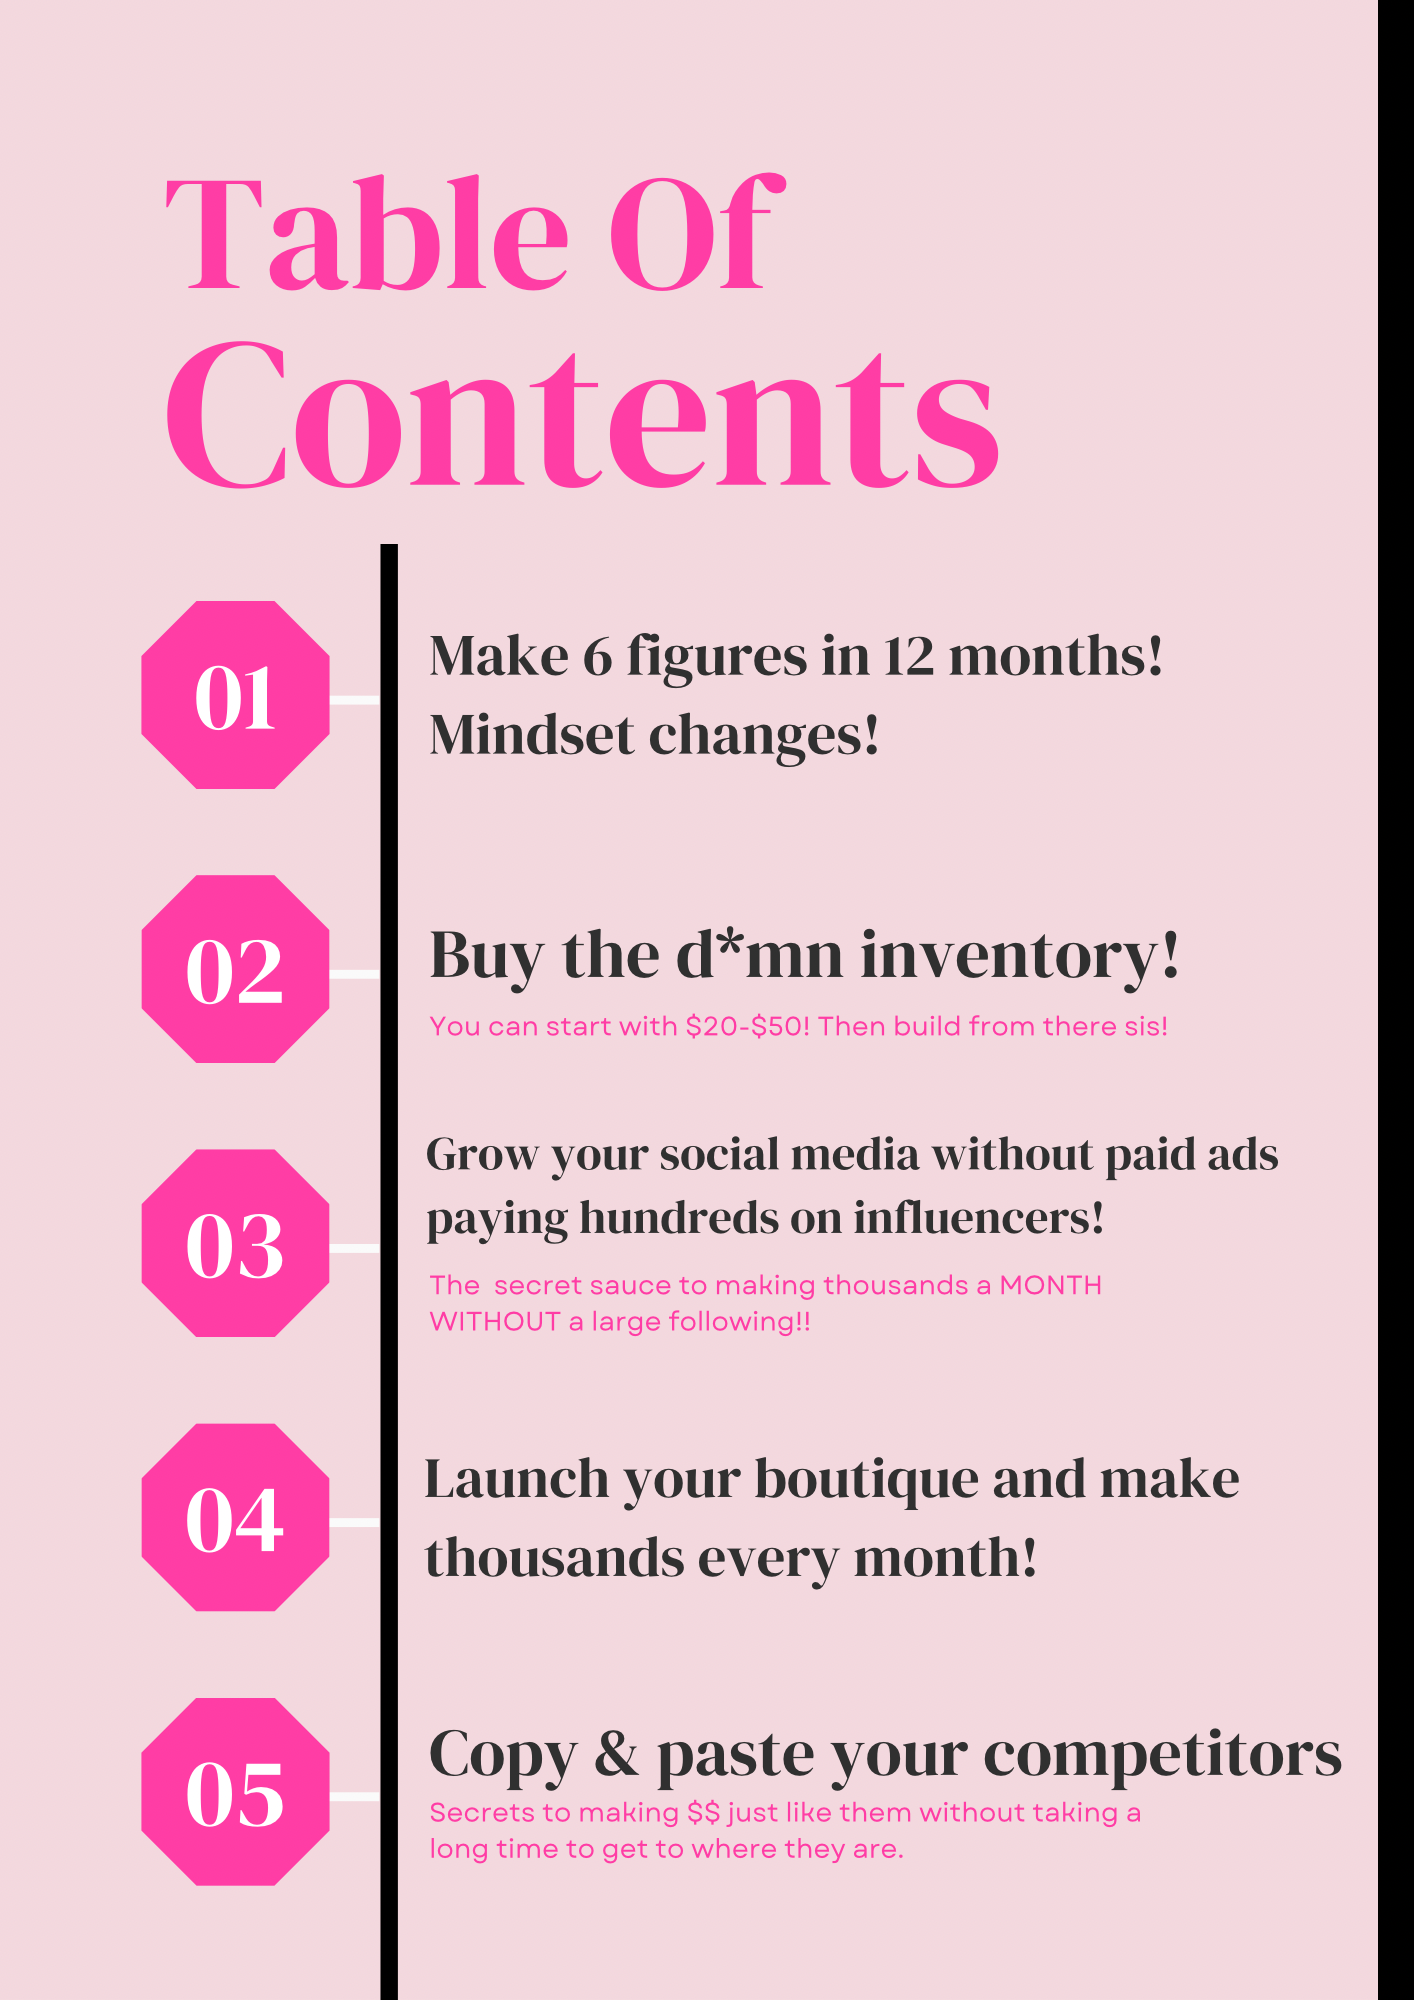 One 6 Figure Vendor + How to start an online boutique with $100 or less guide!